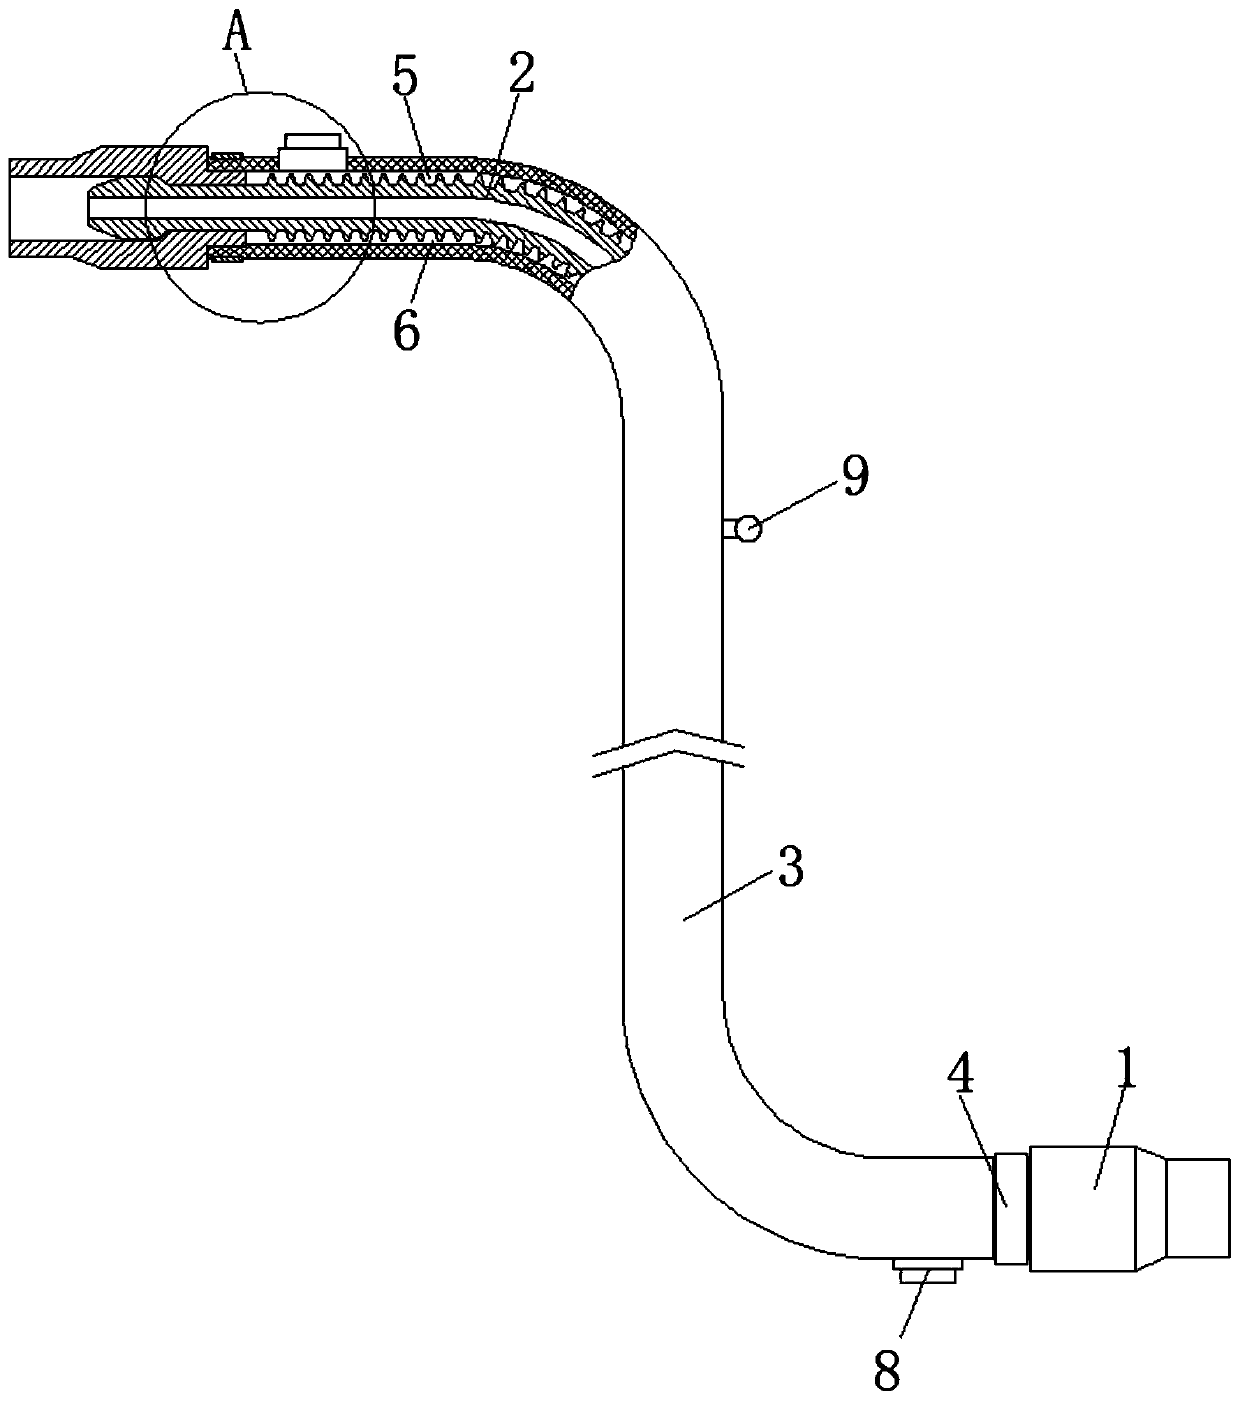 High-pressure oil pipe with composite structure